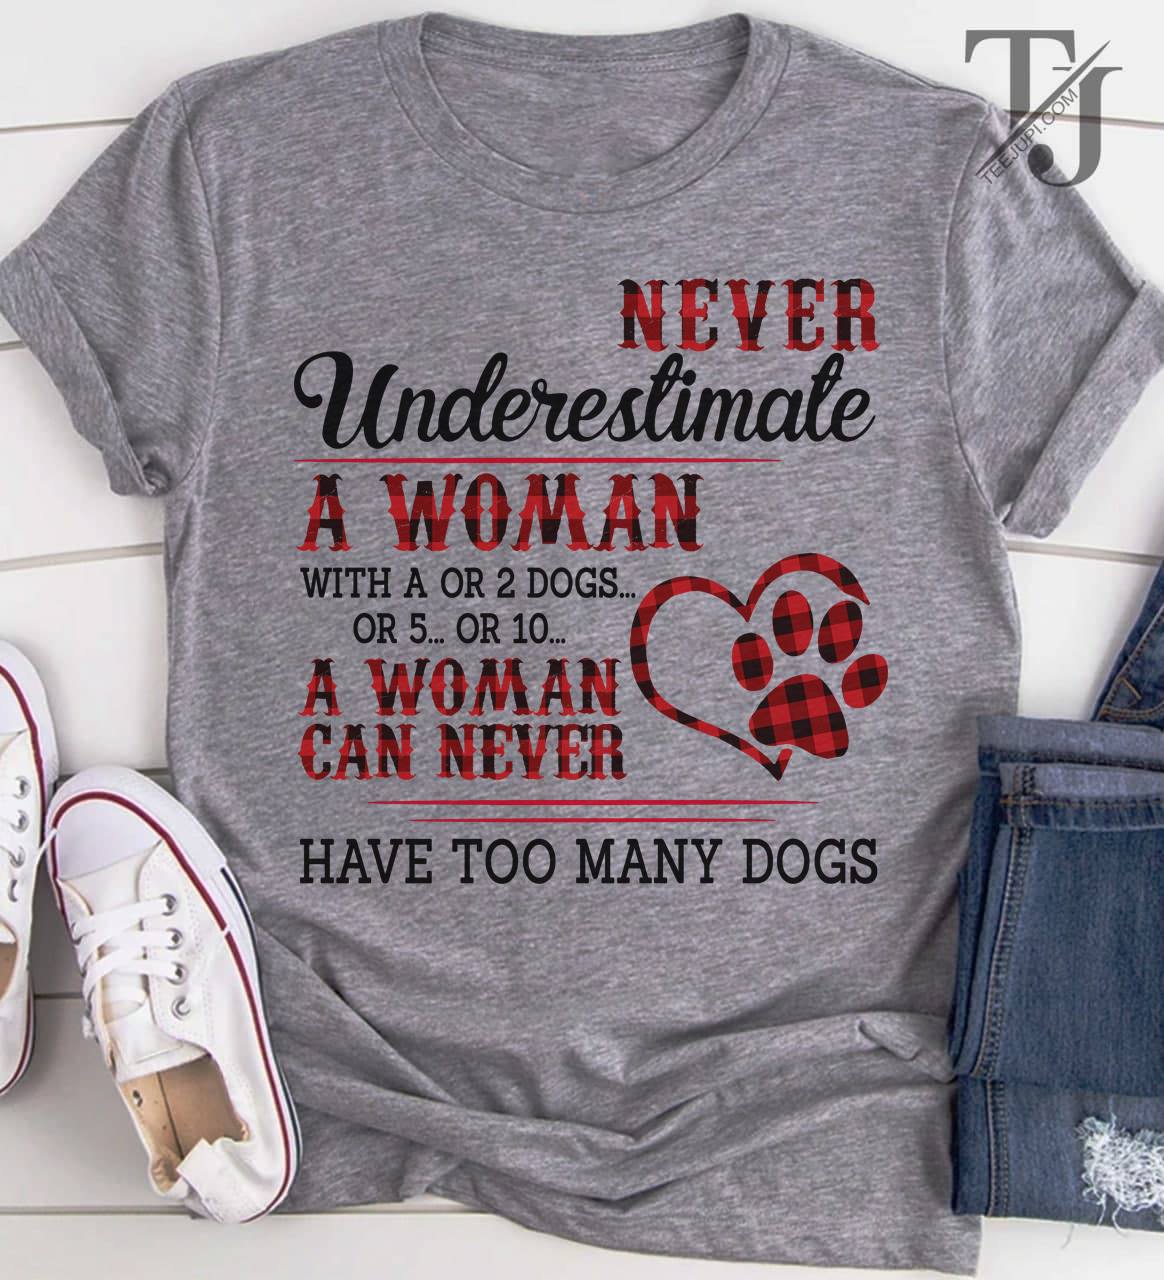 Never underestimate a woman with a or 2 dogs or 5 or 10